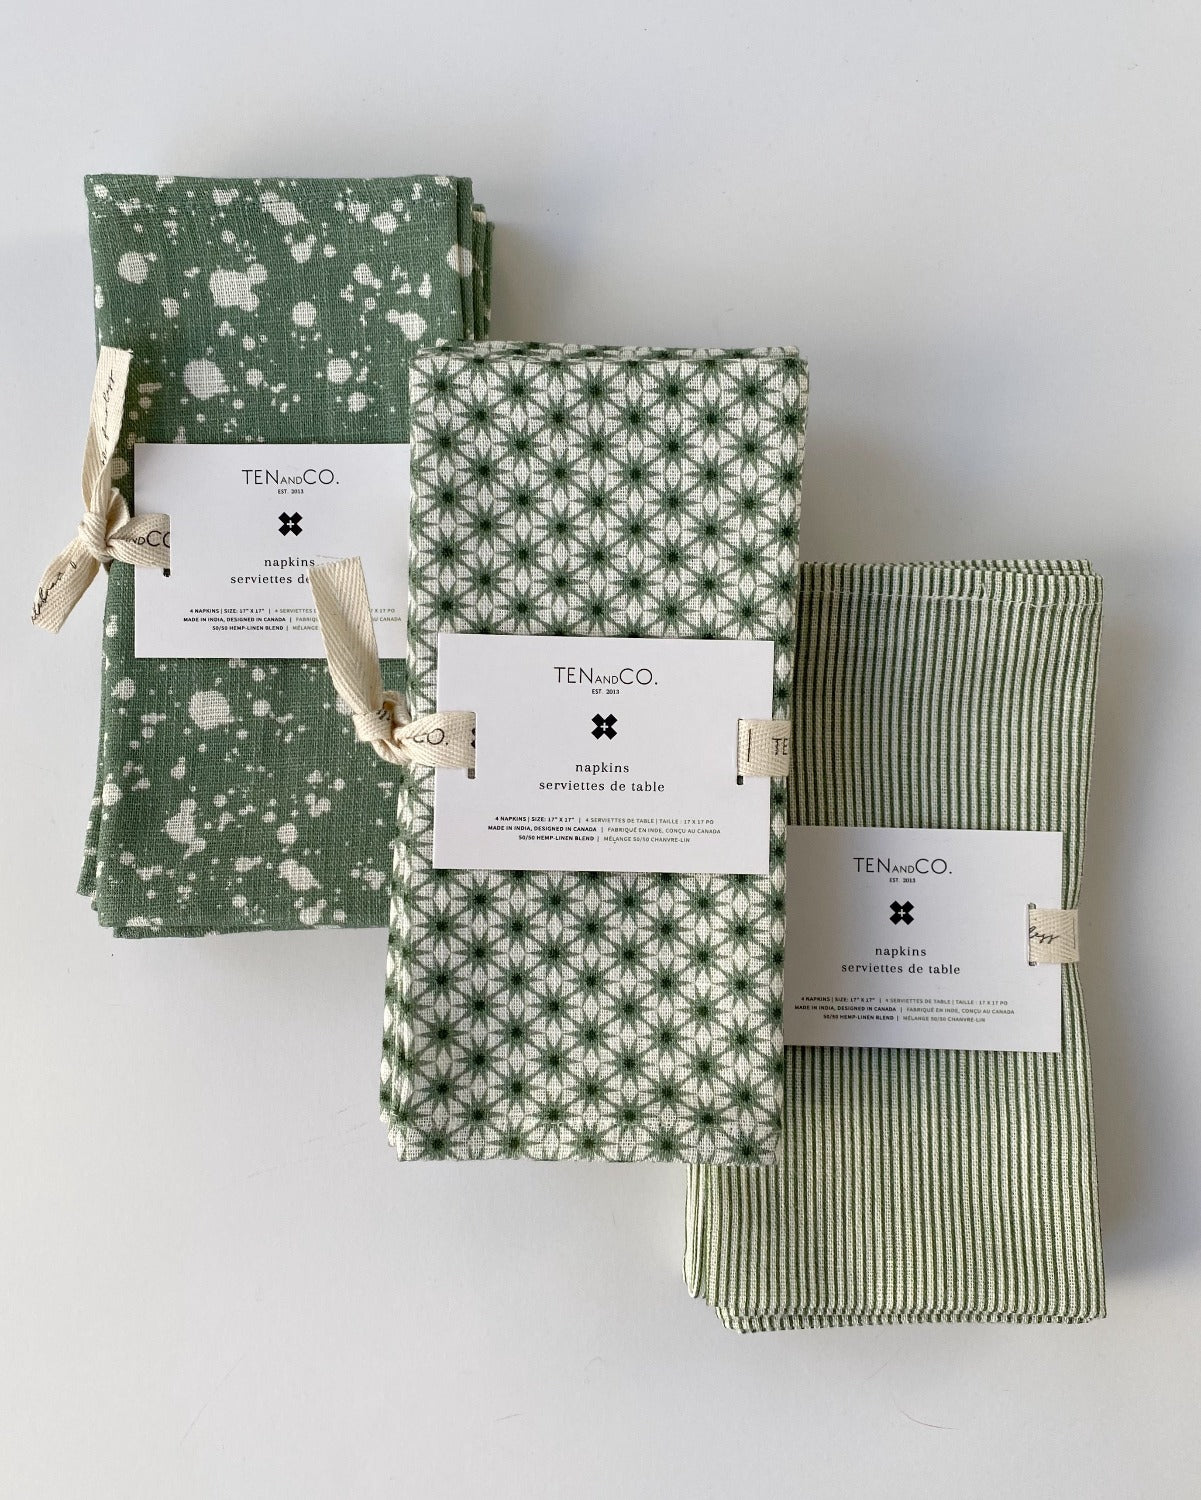 Flat lay image of 3 different sets of napkins. From left to right; Splatter Sage, Starburst Sage, Stripe Sage. All sets of napkins are laid in a diagonal method, with the Splatter Sage closer to the top left, and the Stripe Sage closer to the bottom right of the image. All napkins are tied with the Ten and Co printed description label on top.